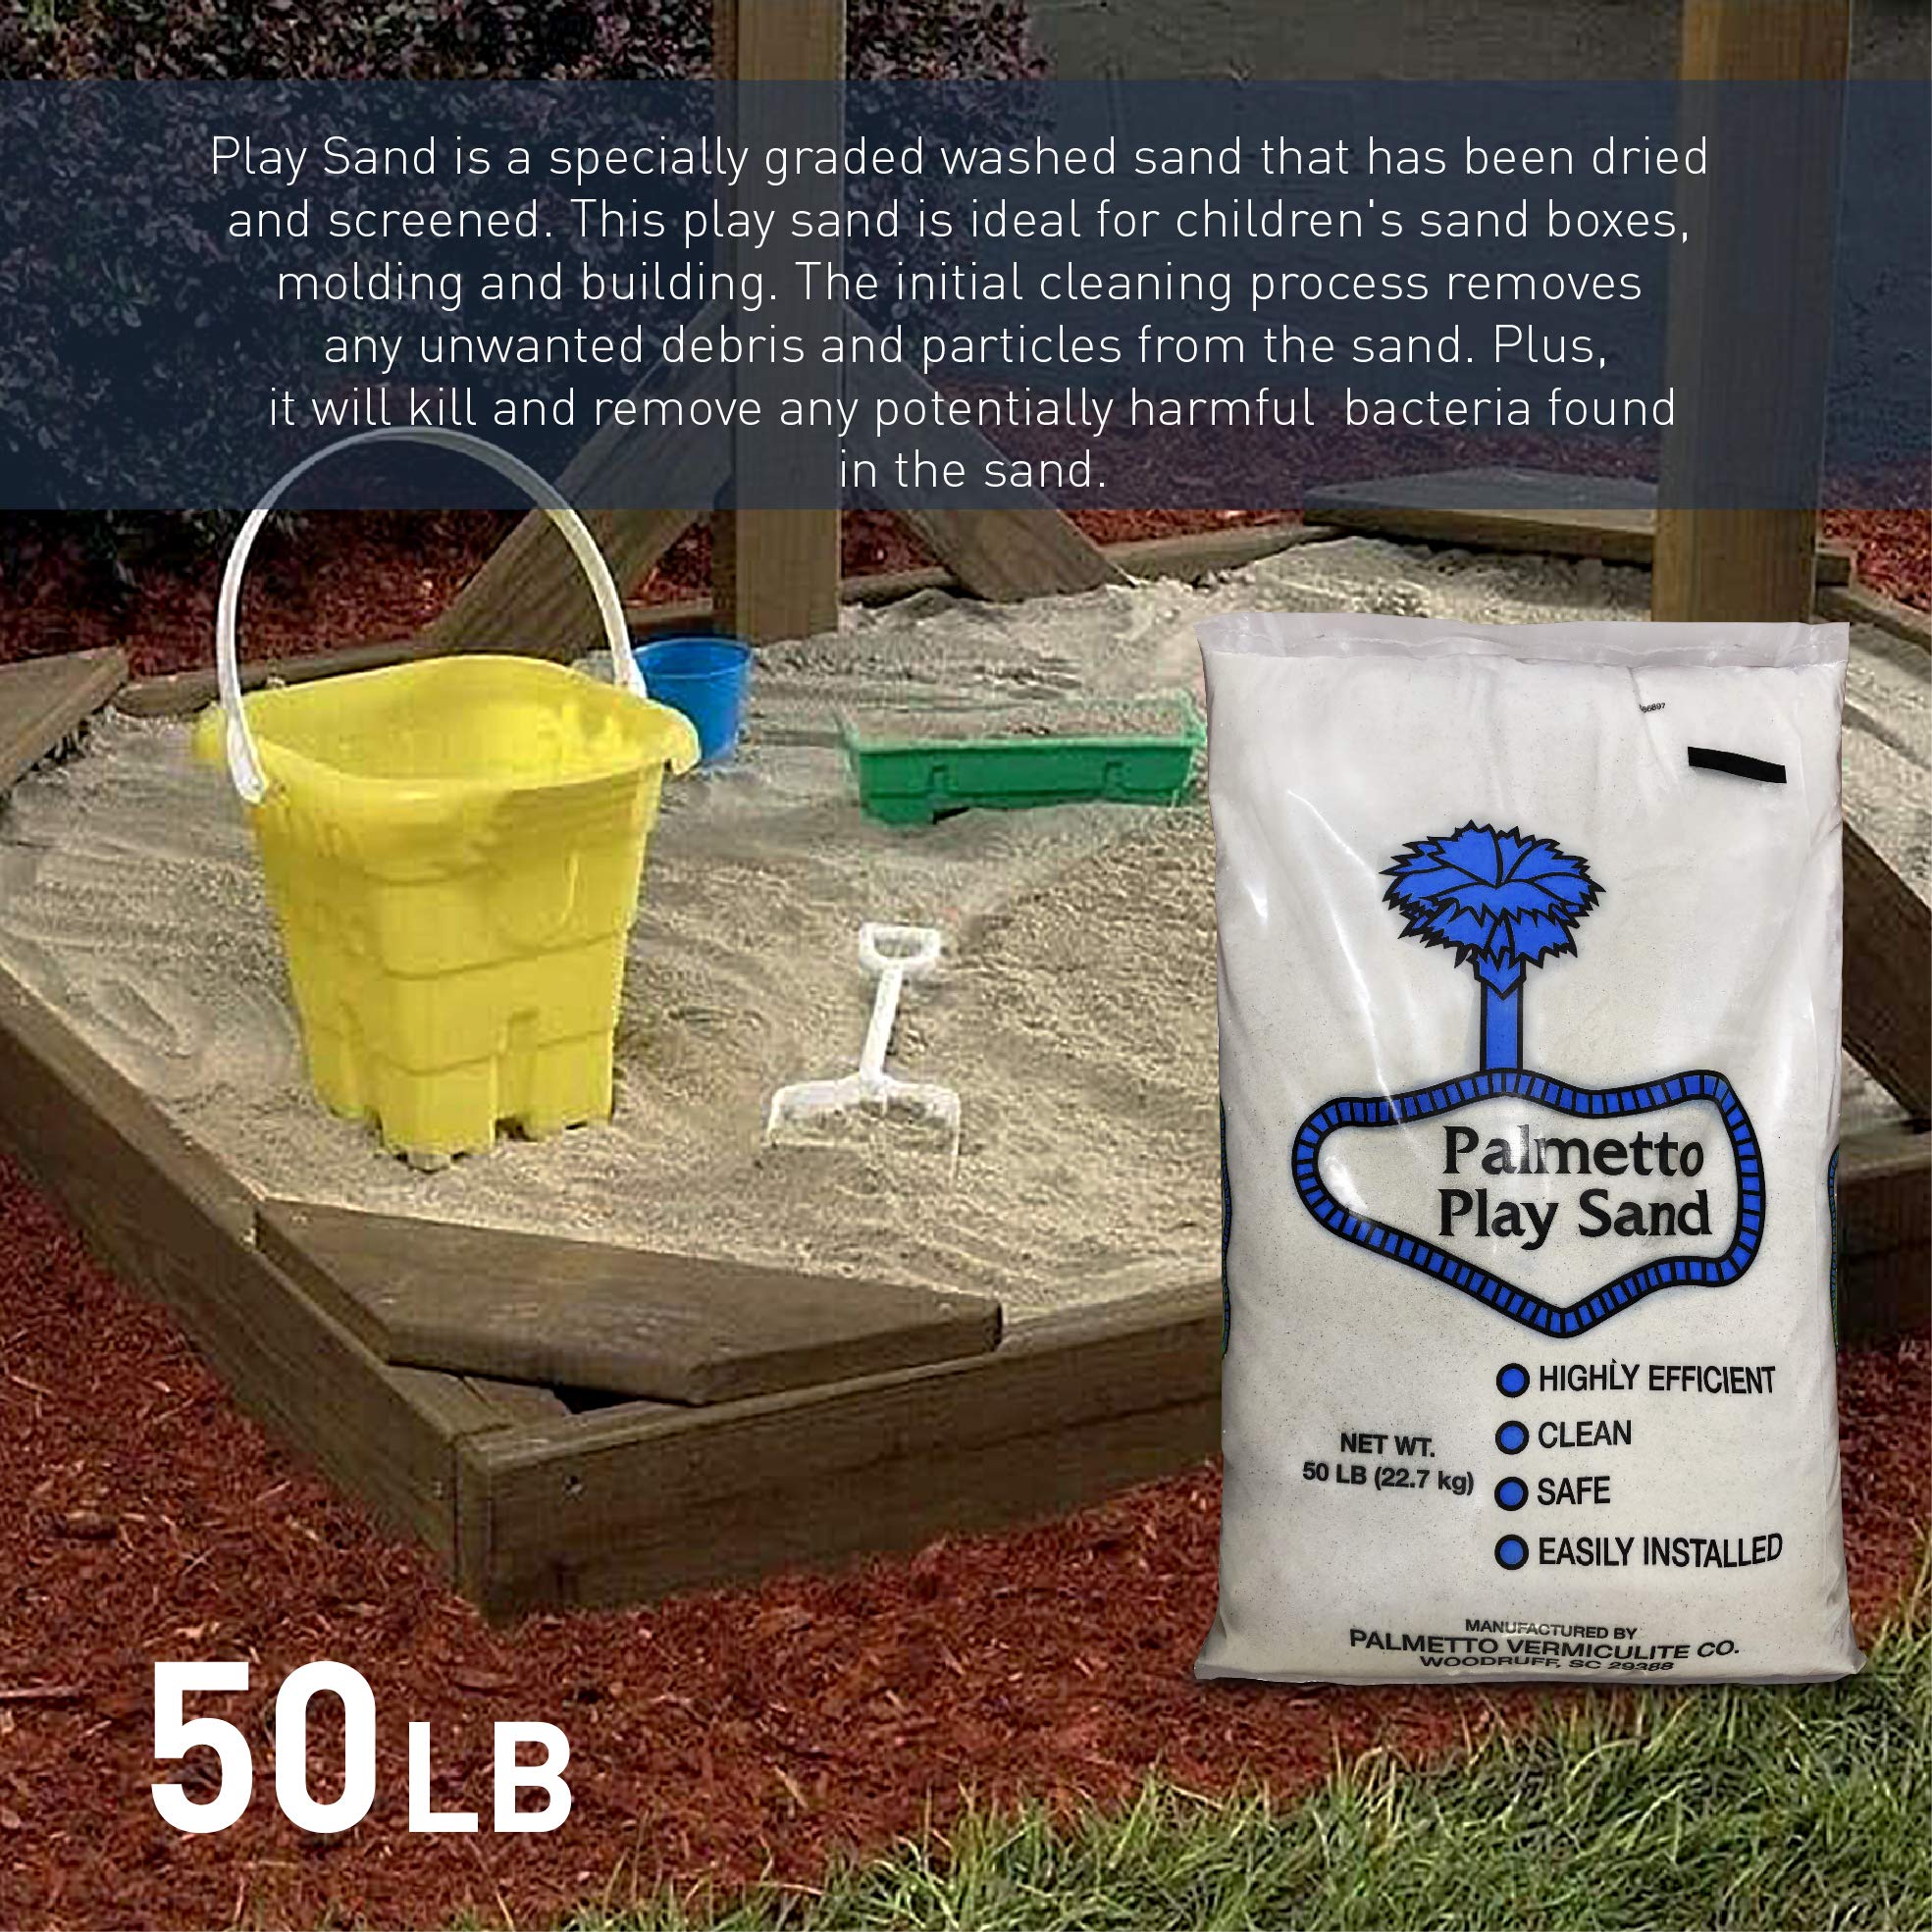 Play Sand 50 Pounds Natural – Filtered, Screened, Washed and Dried Soft Sand – Great for Sand Table, Sand Box, Play Areas, Arts and Crafts, Home Decorating – Beautiful Crème Color